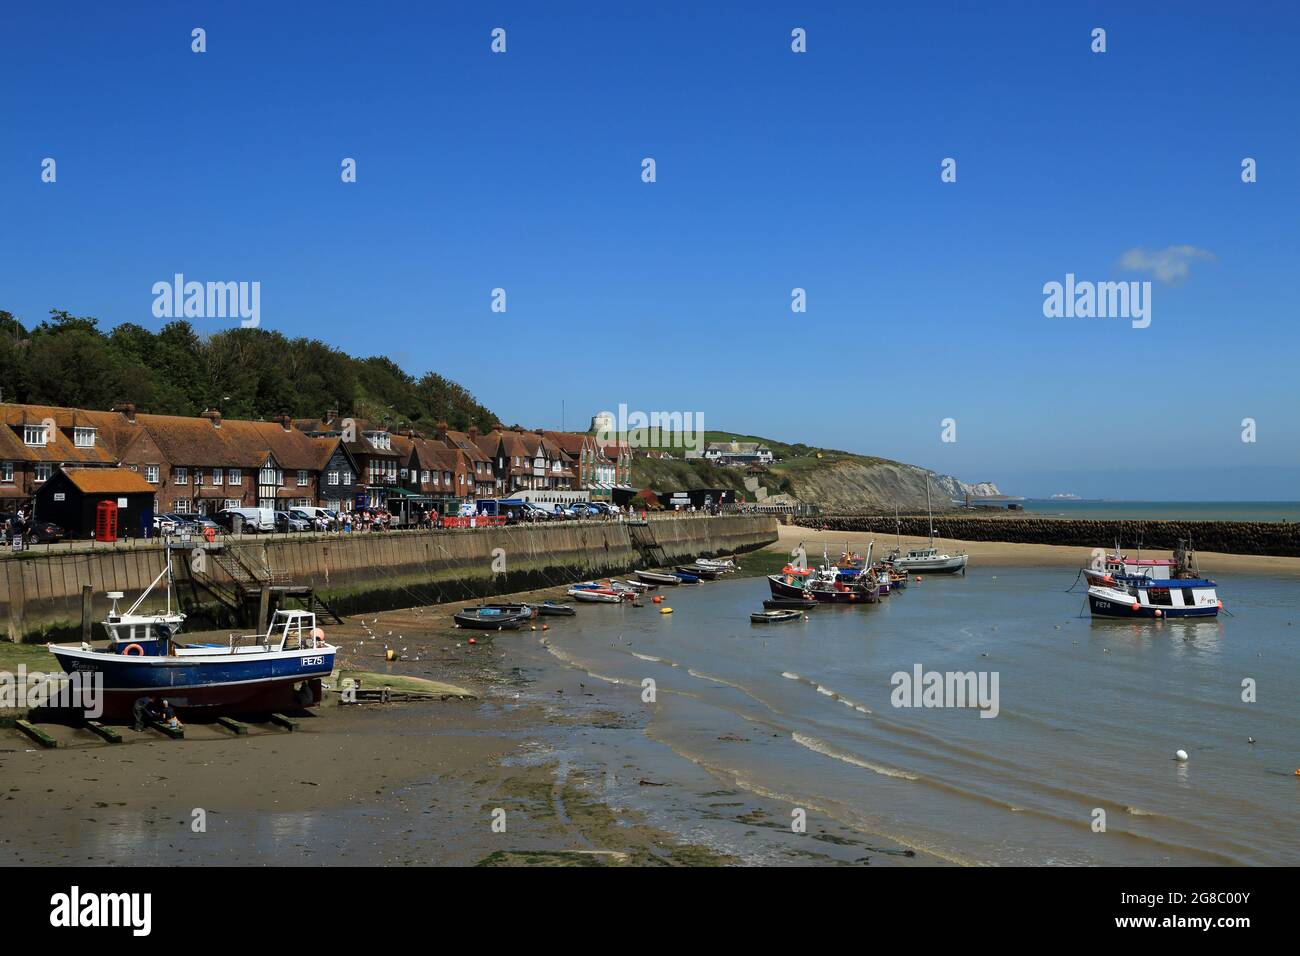 View of the outer harbour with an incoming tide, Folkestone, Kent, England, United Kingdom Stock Photo